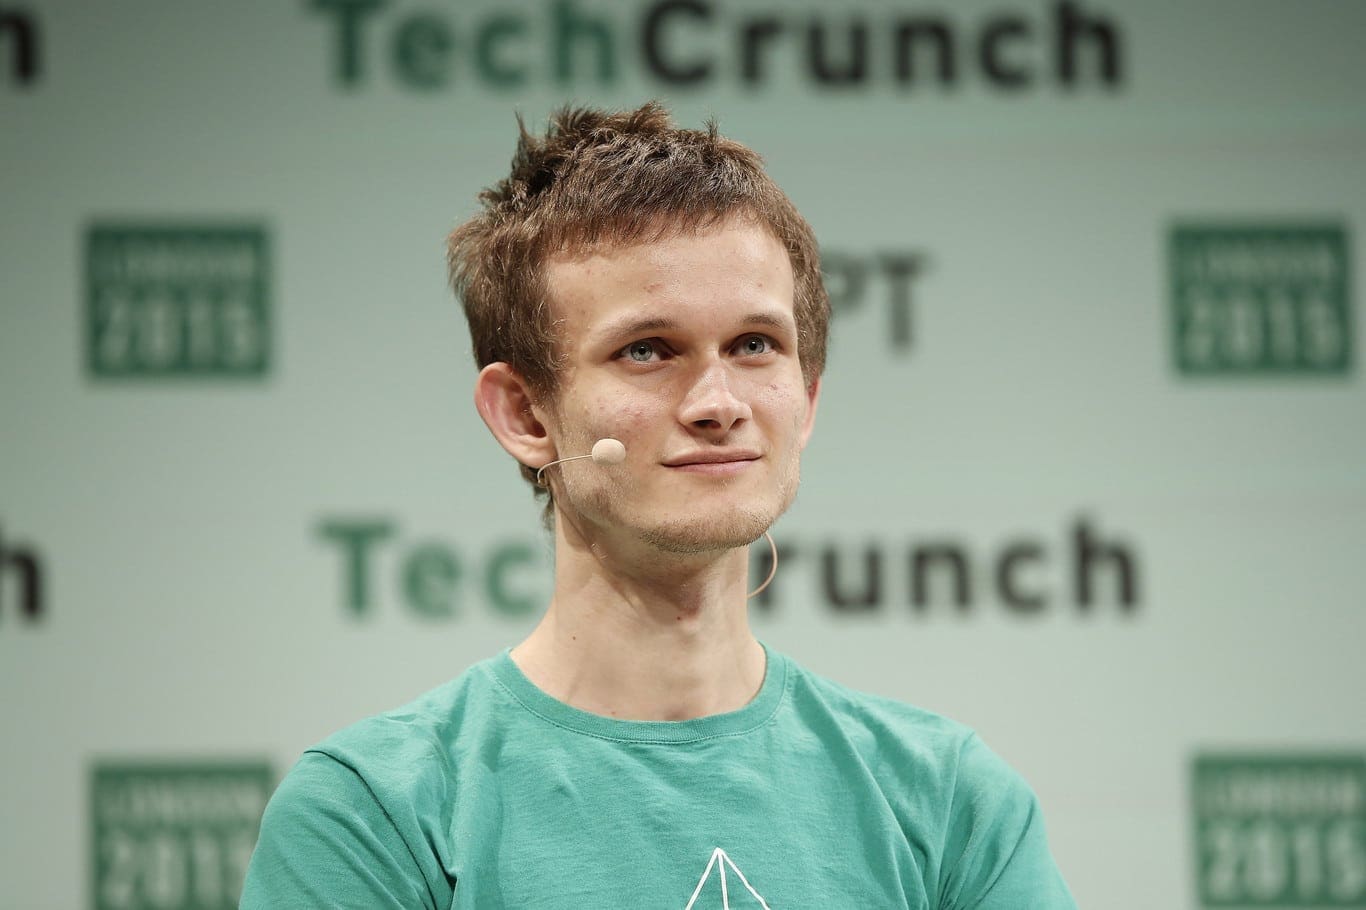 Buterin says Terra should prioritise protecting the smallholders over the whales